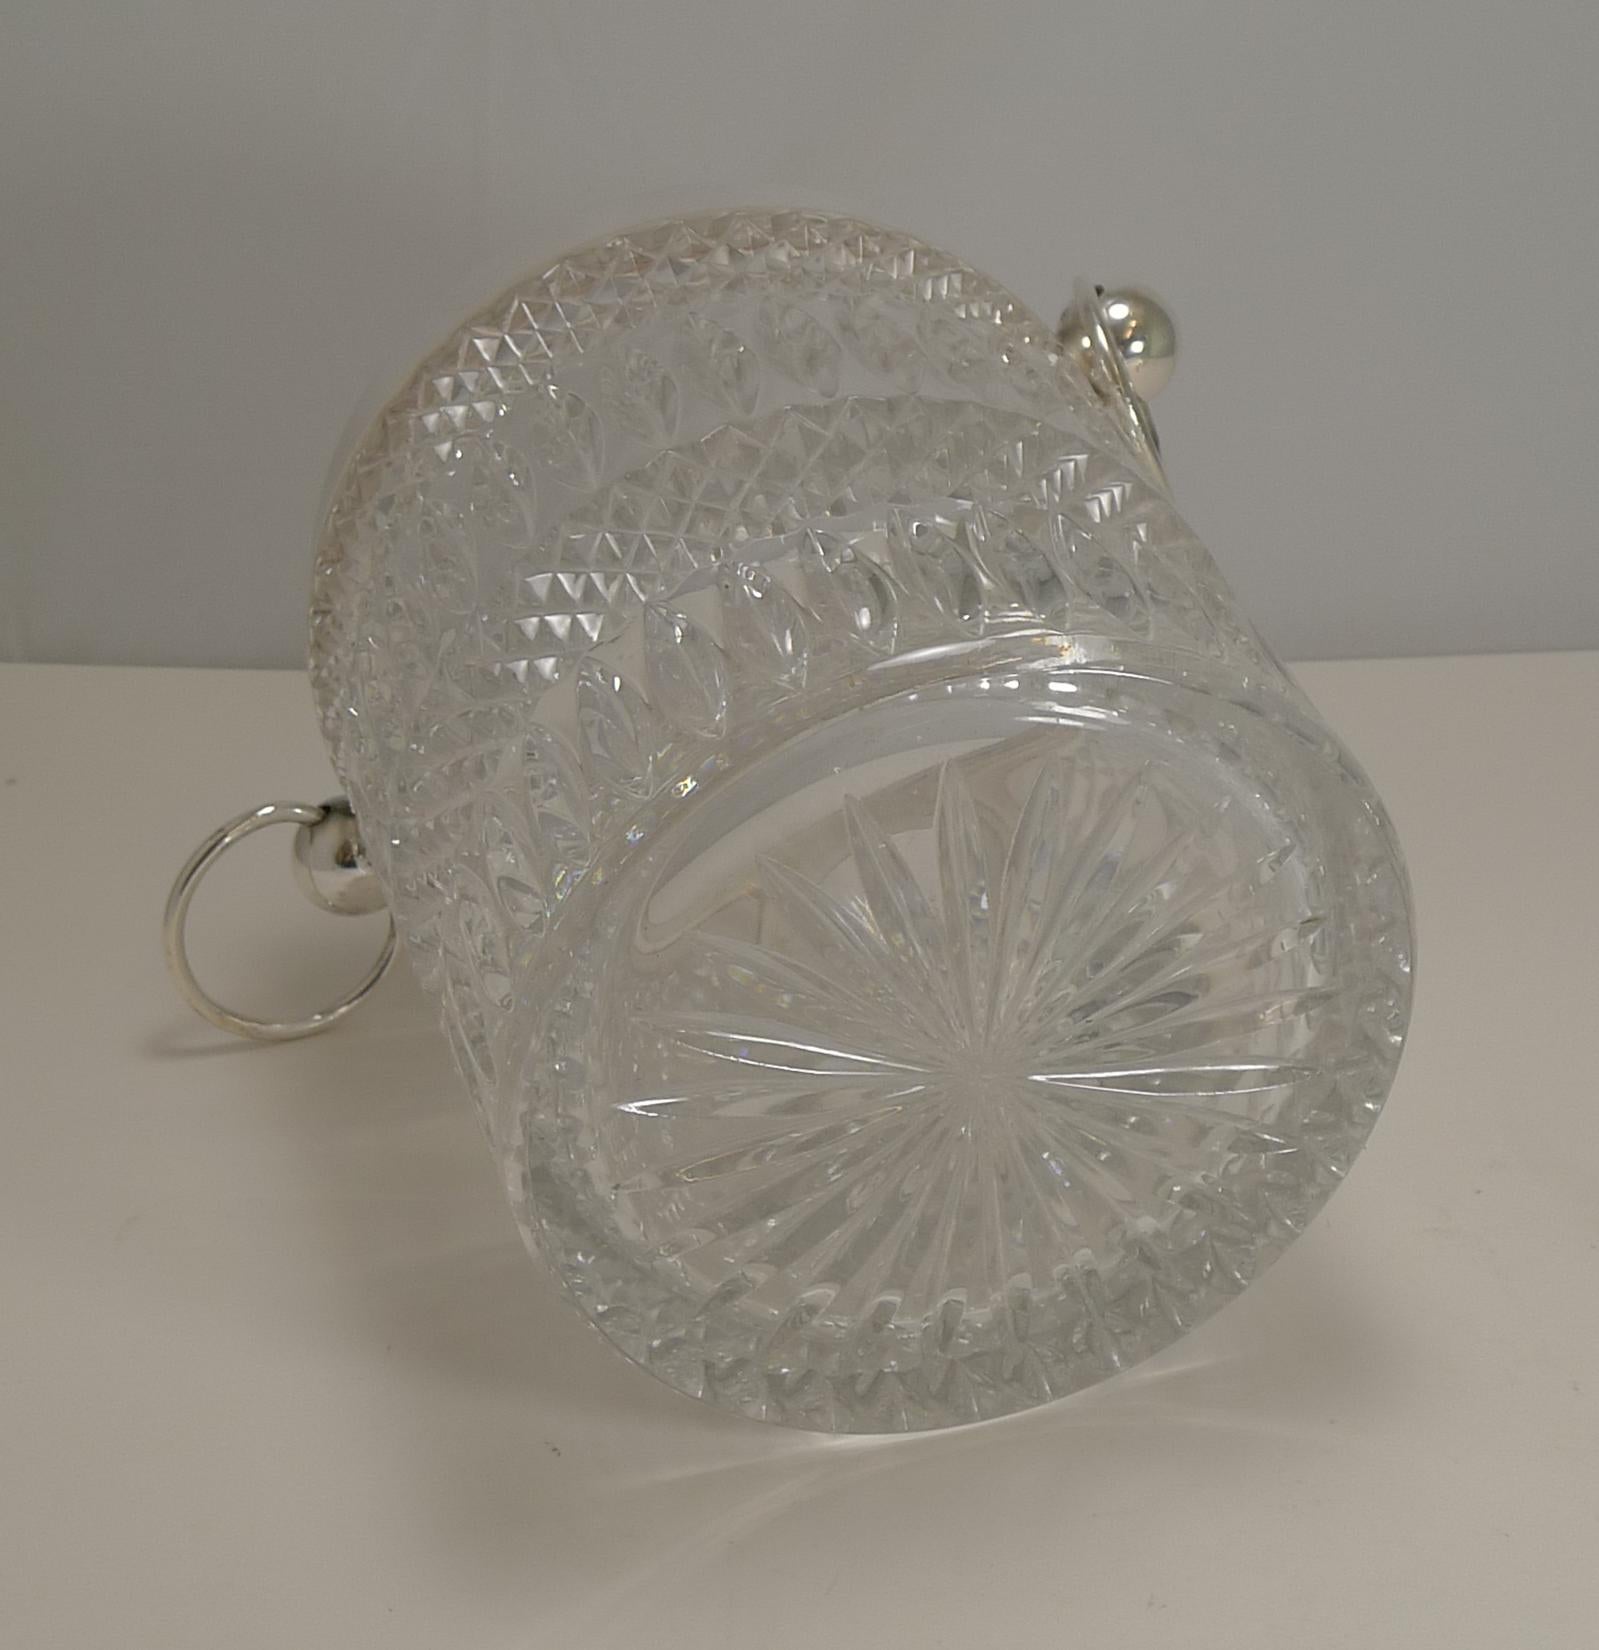 European Vintage 1960s Crystal and Silver Plate Wine Cooler / Champagne Bucket